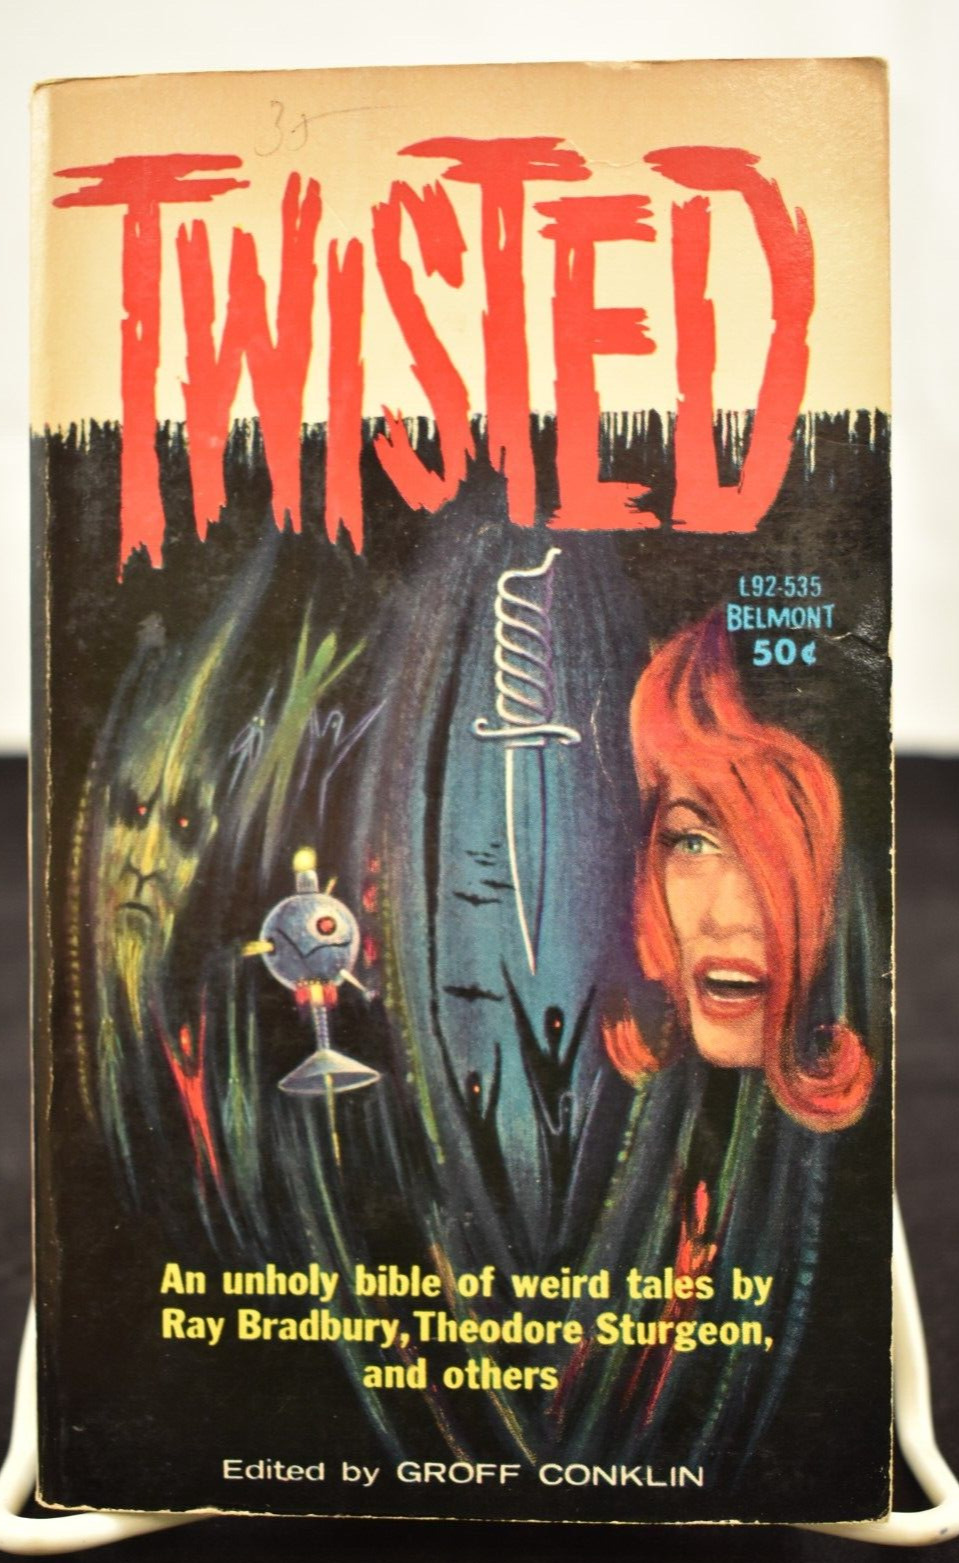 Twisted Groff Conklin Paperback First Printing 1962 Belmont Books